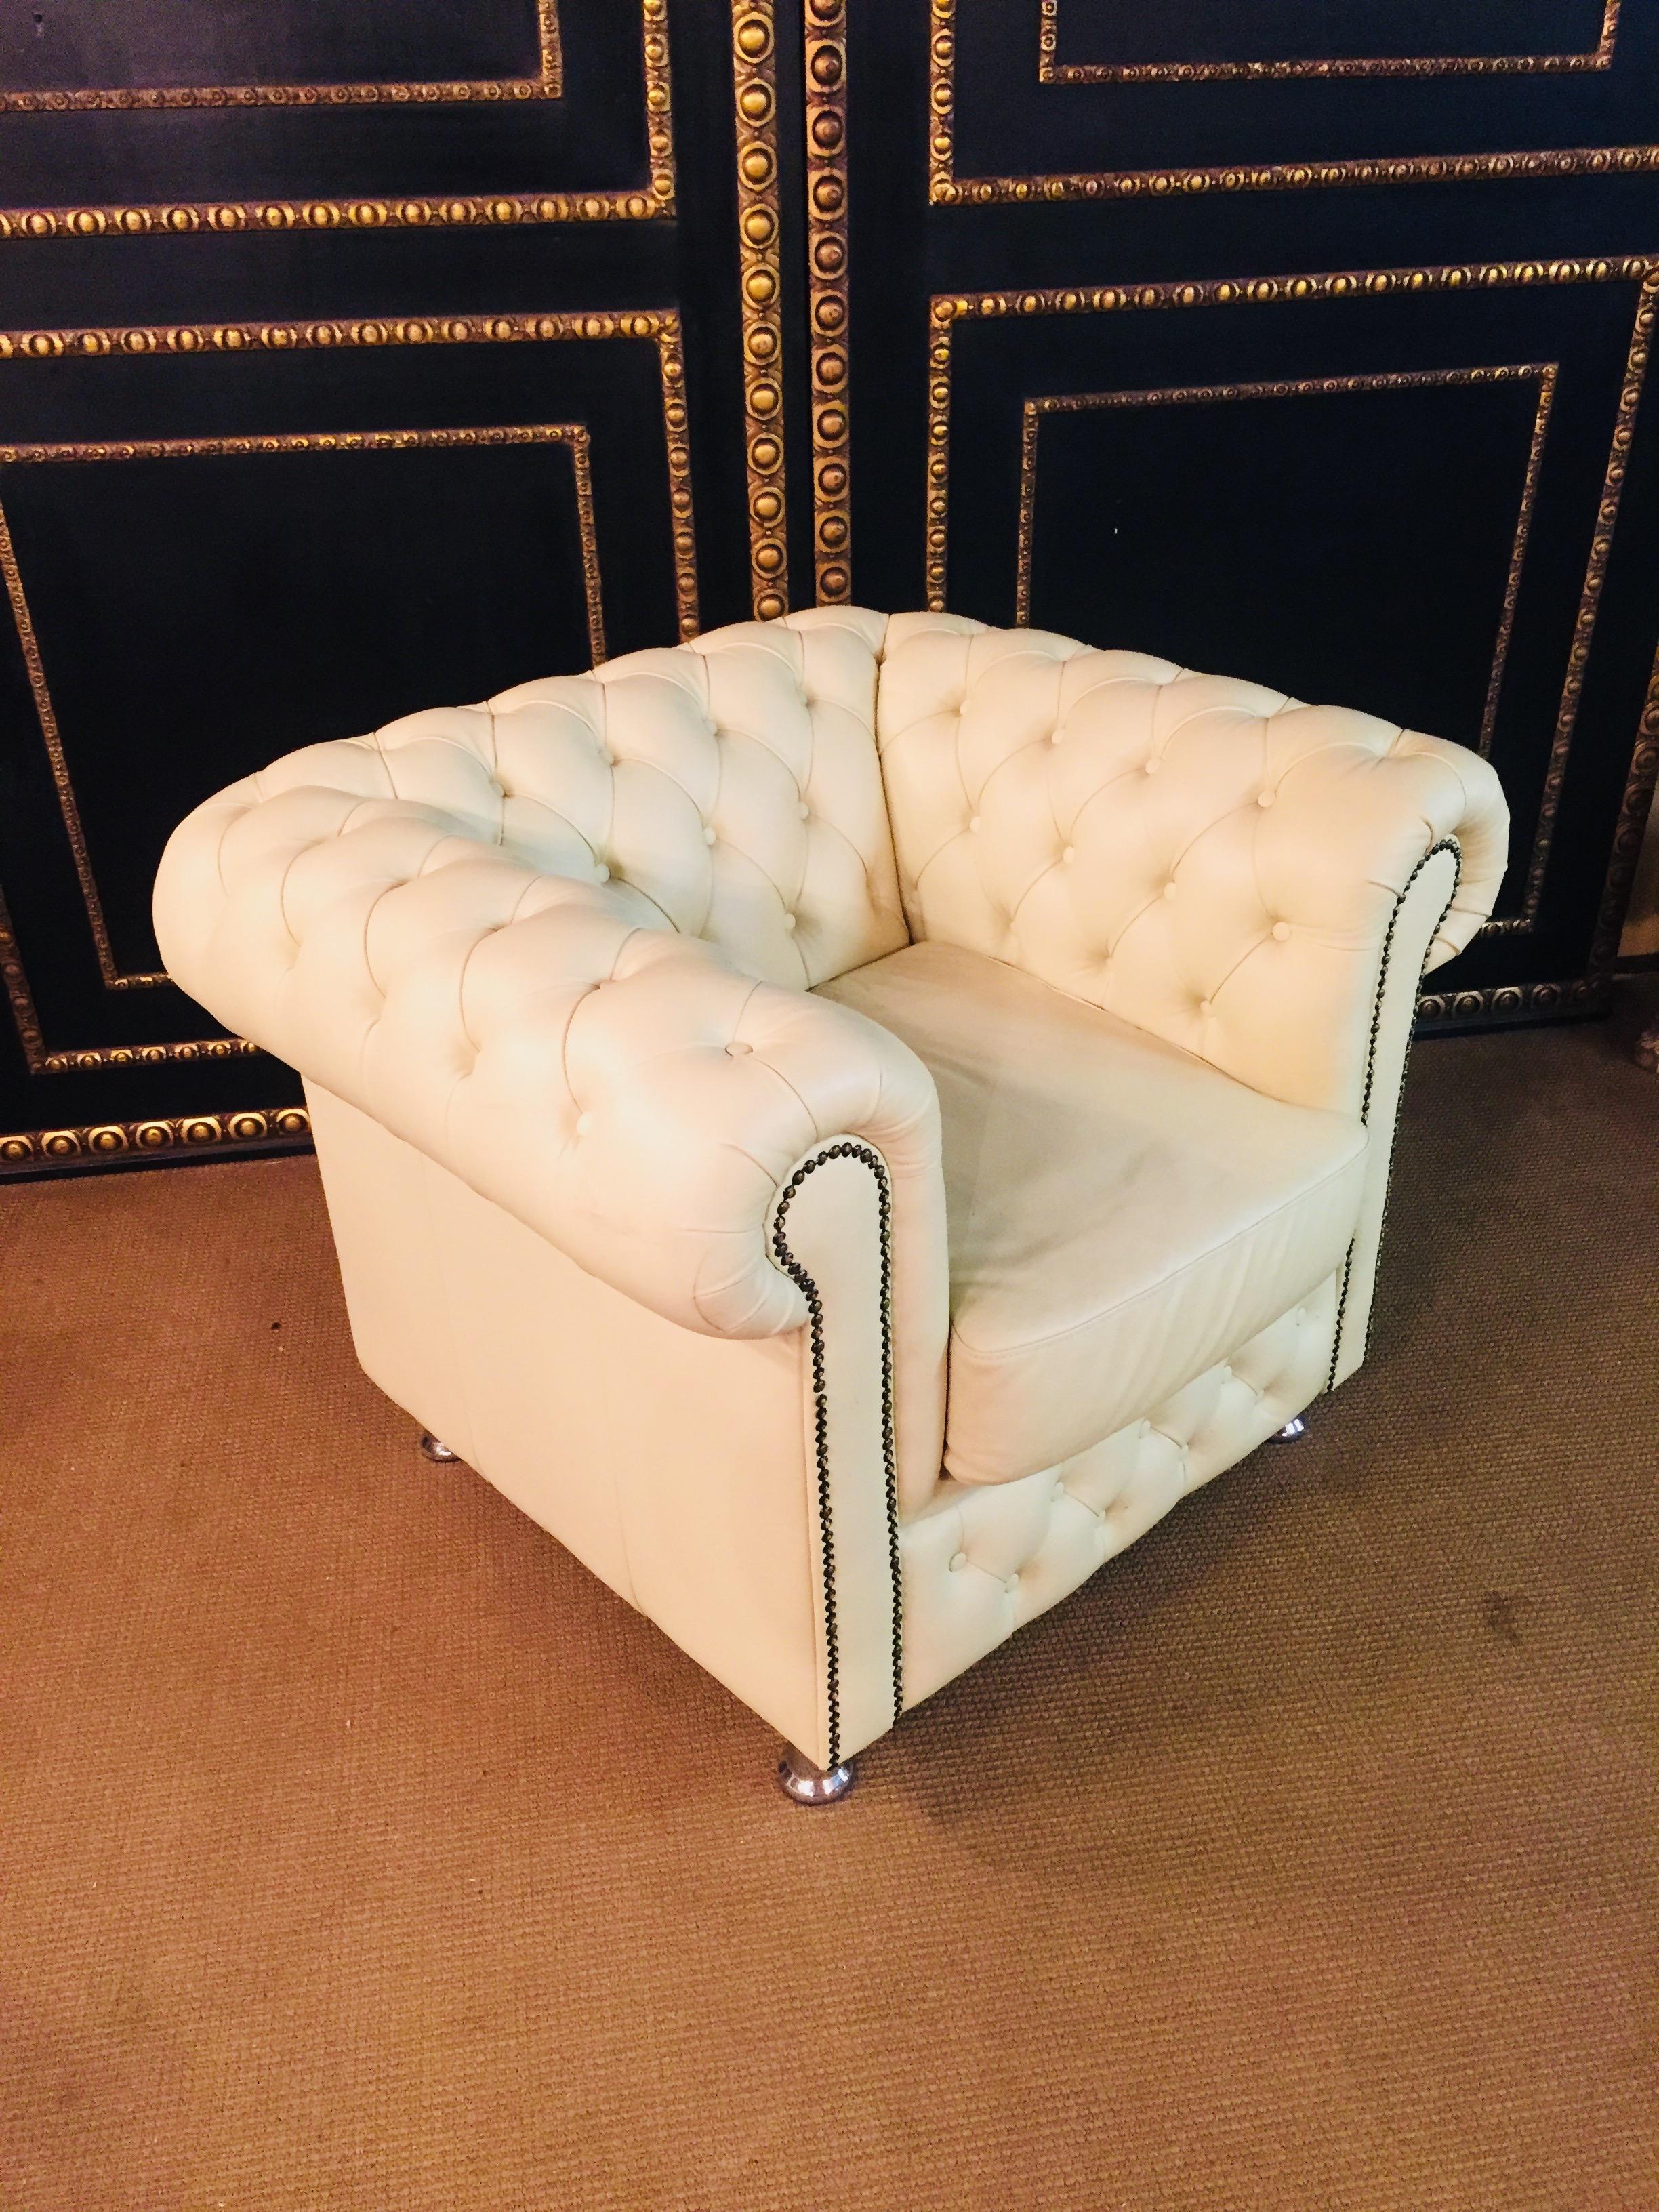 Chesterfield armchair. Armchair measures: height x 80 cm, width x 110 cm, x depth 100cm. Condition: The chair is in a very good condition. Very comfortable and with beautiful rare color beige not white. Upholstery is in a very good condition (see